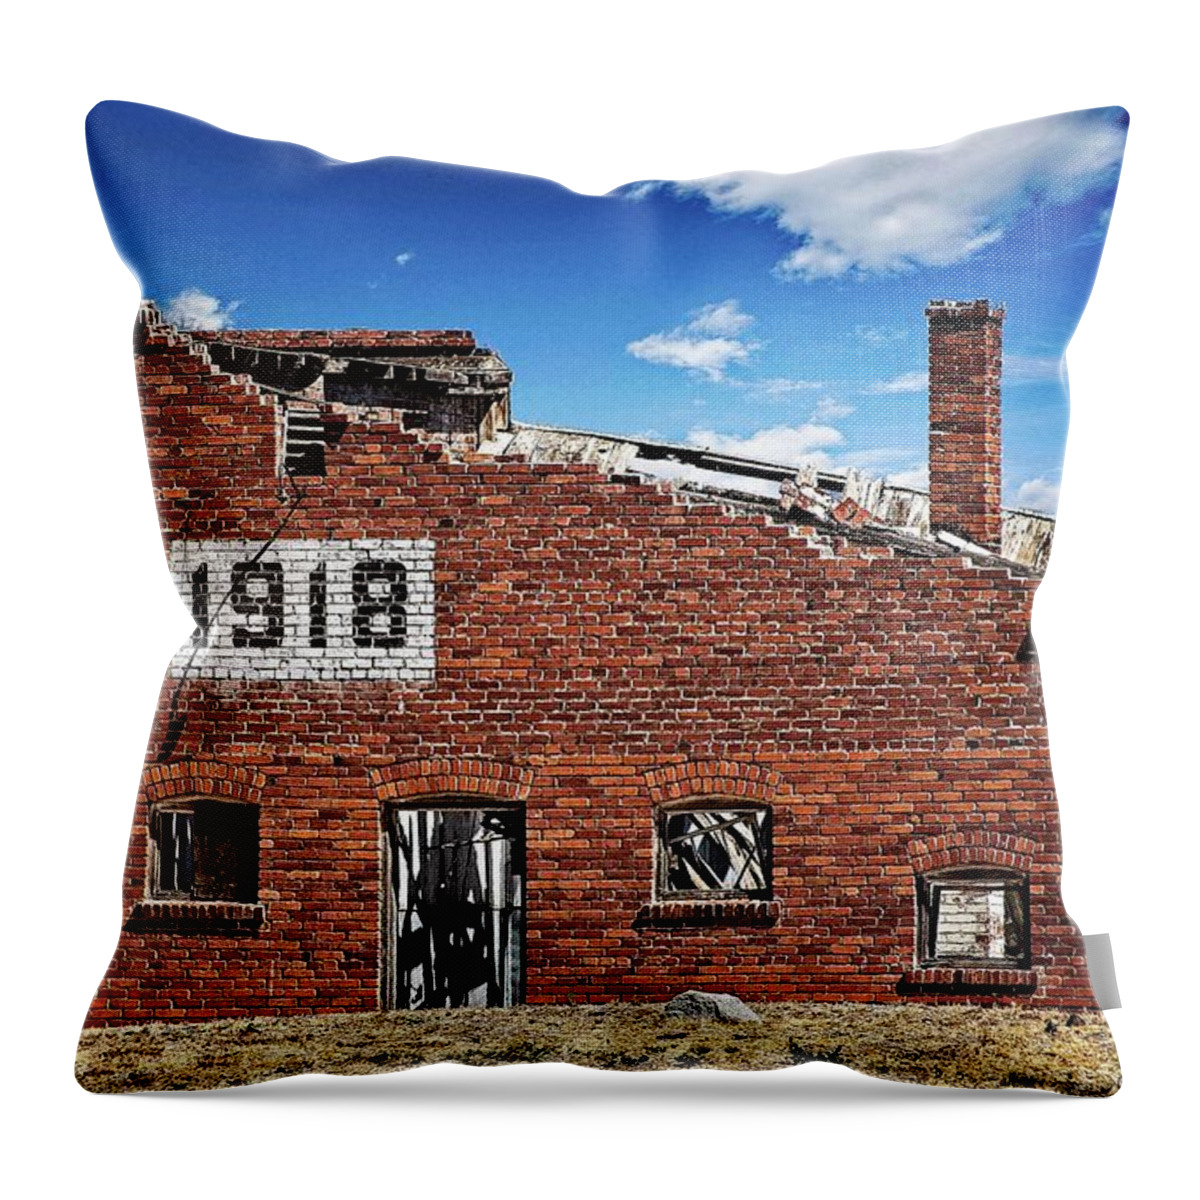 Attraction Throw Pillow featuring the photograph 1918 Dilapidated Building by David Desautel